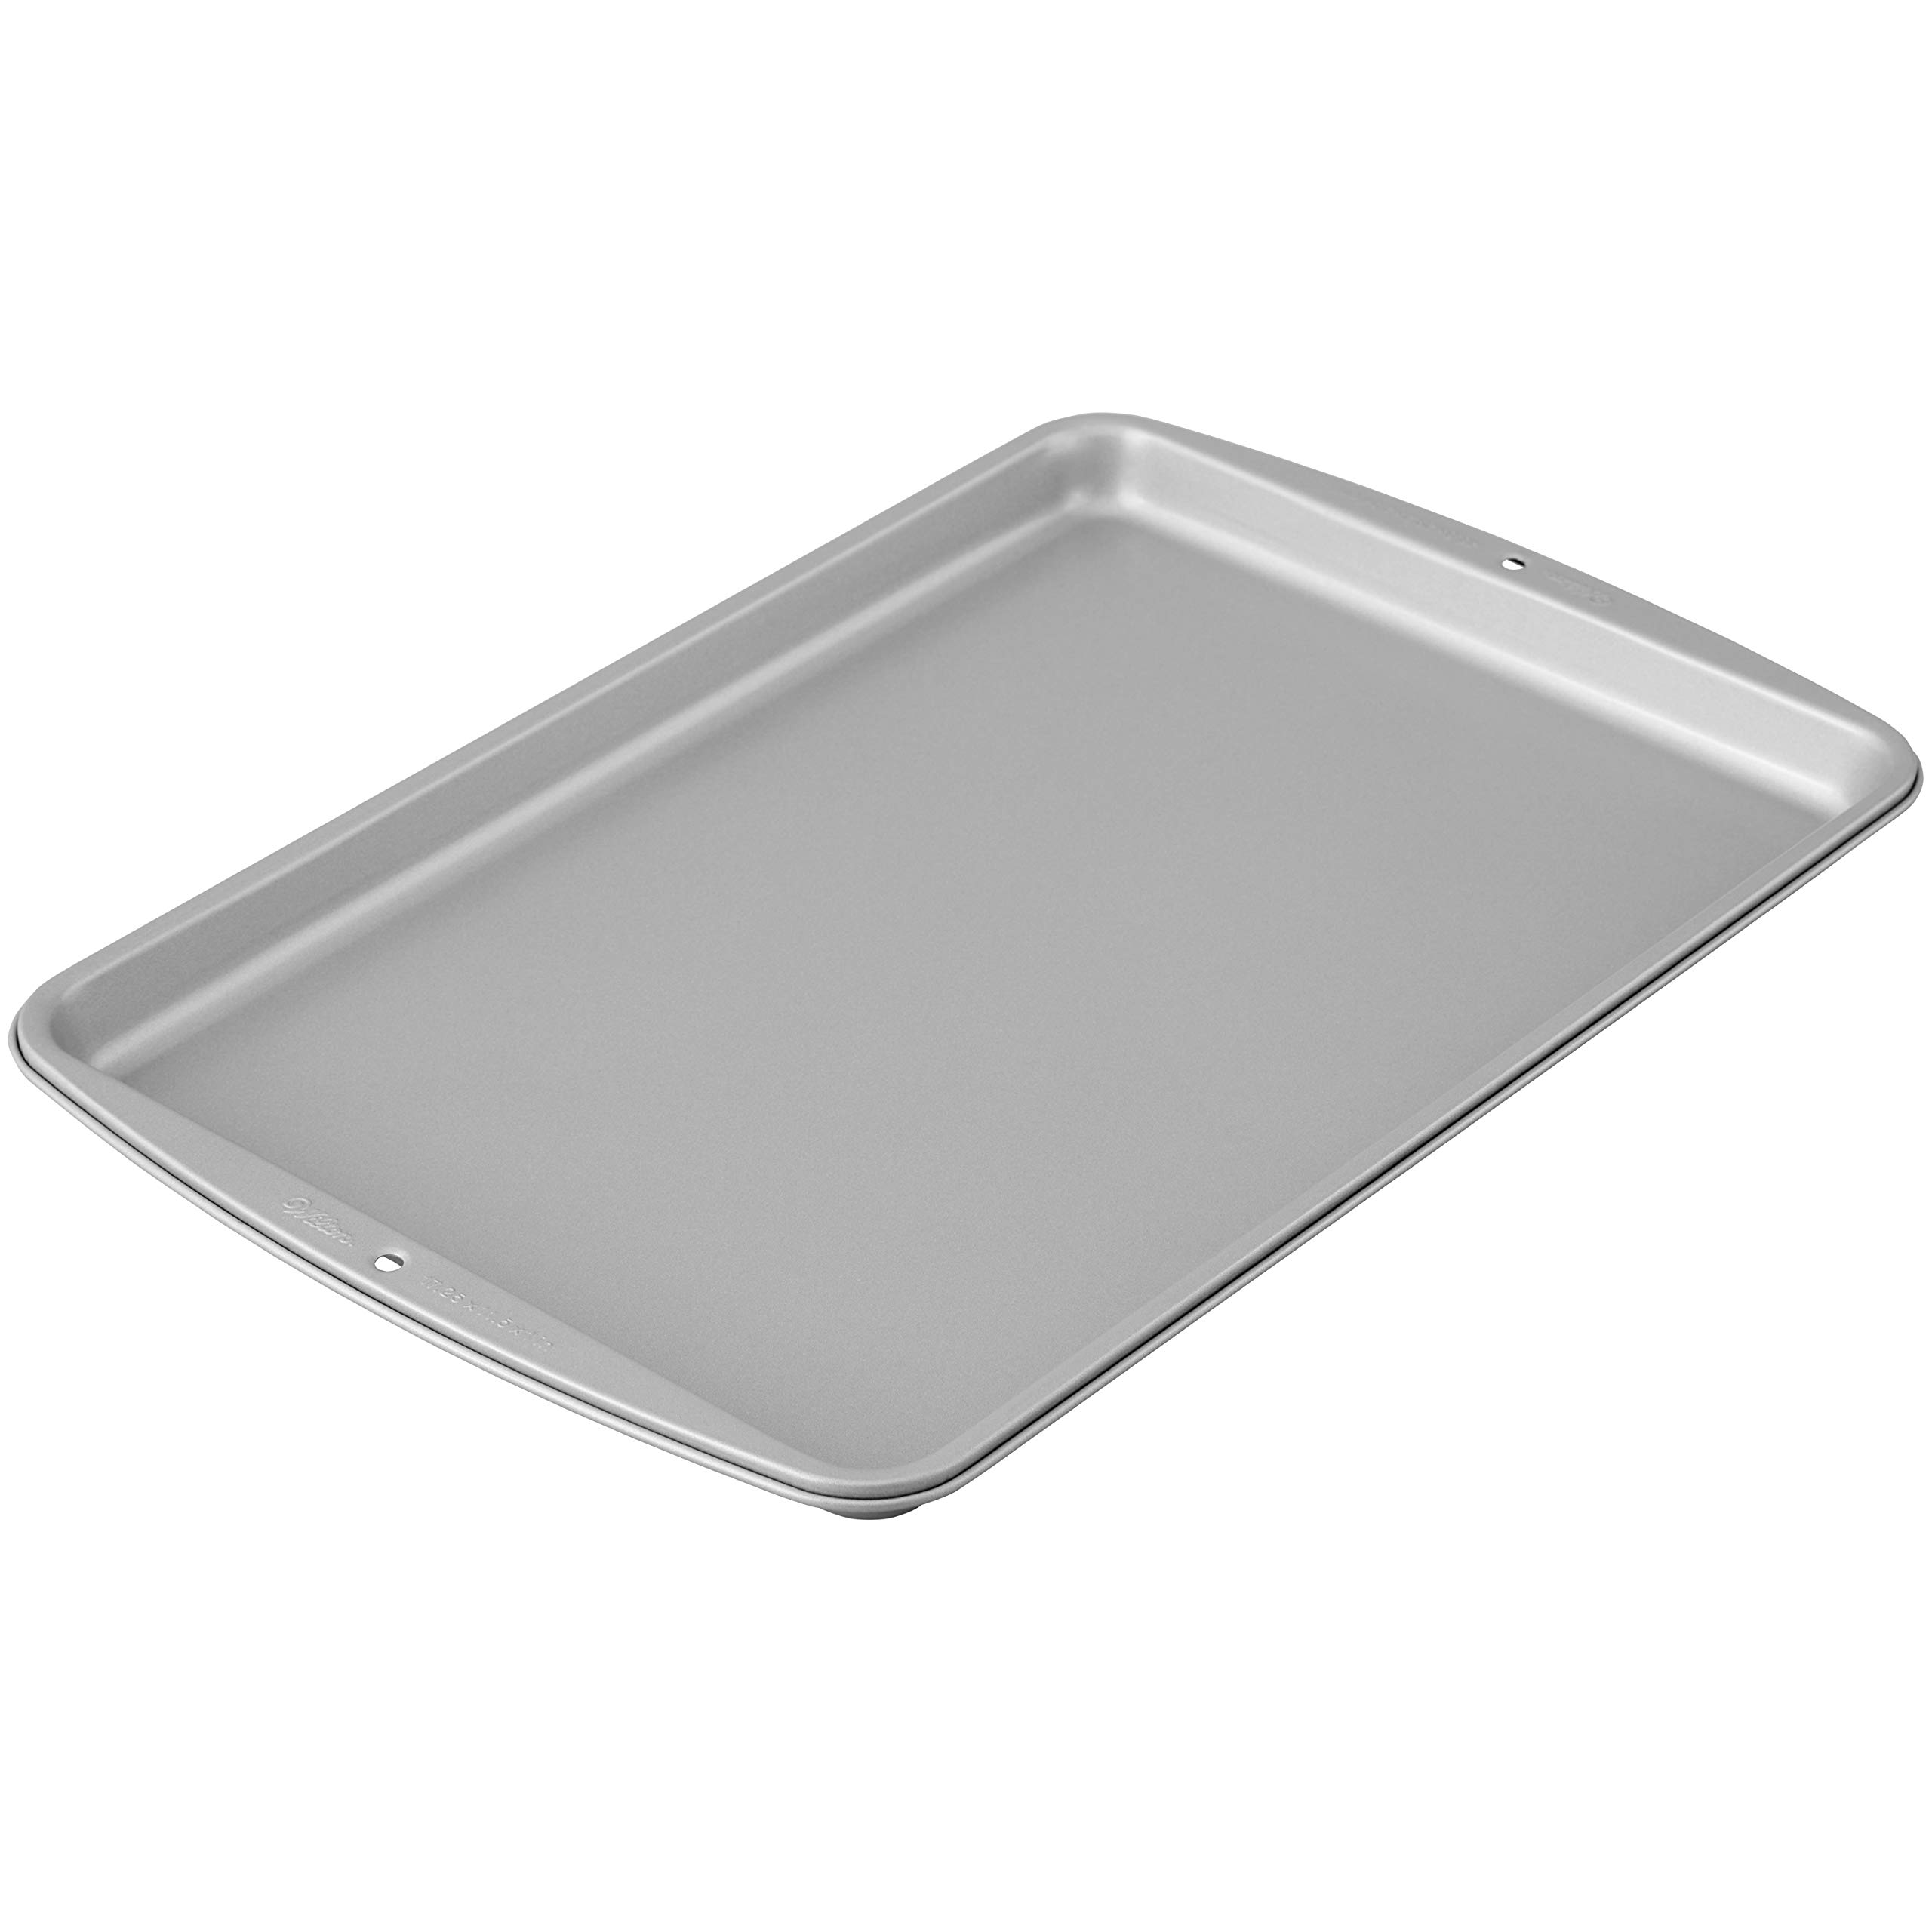 Wilton Recipe Right Cookie/Jelly Roll Pan, 17-1/4 by 11-1/2-Inch